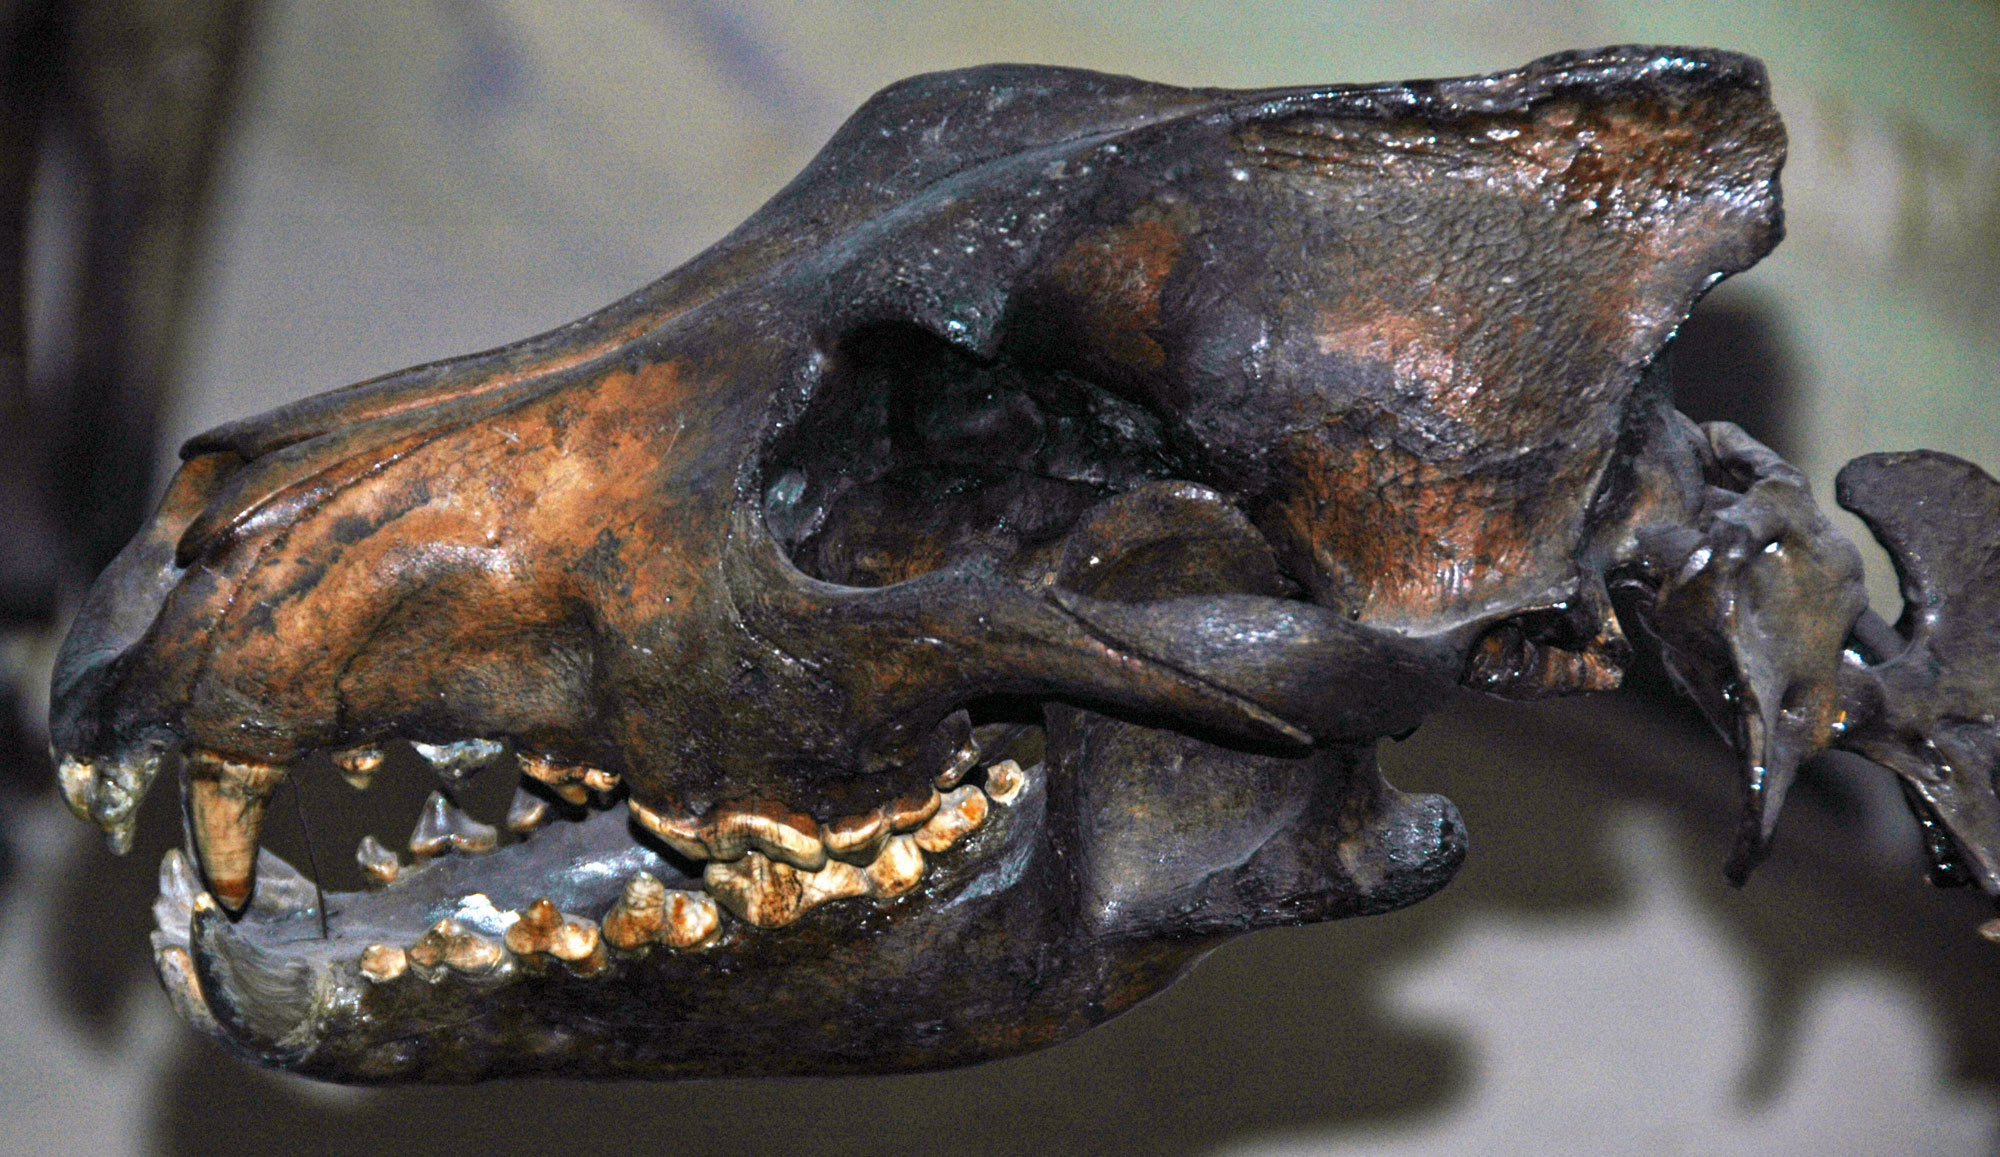 Photograph of the skull of a dire wolf. The skull varies from brown to black in color. It is dog-like with sharp teeth.